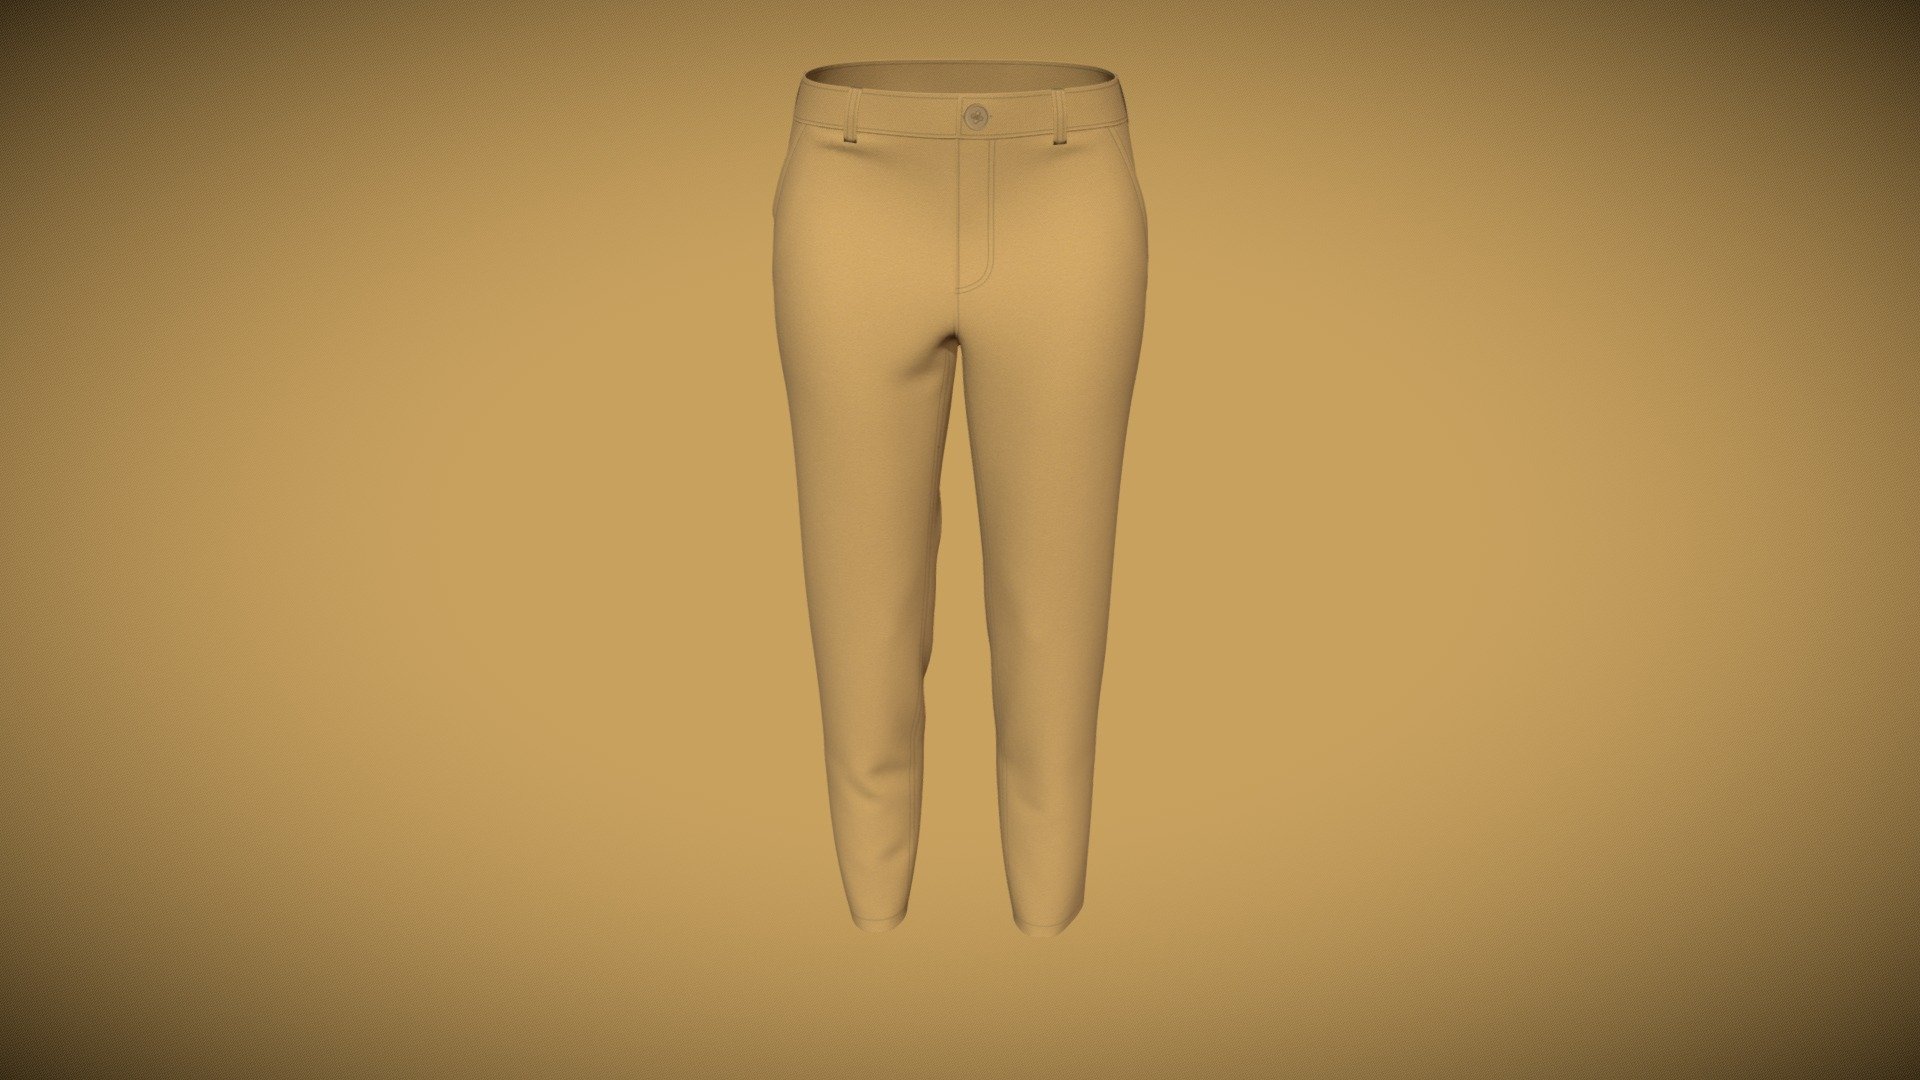 Cloth Title = Simple Pants Outfit Street Style 

SKU = DG100090 

Category = Unisex 

Product Type = Pant 

Cloth Length = Long 

Body Fit = Slim Fit 

Occasion = Casual  

Waist Rise = Mid Rise 


Our Services:

3D Apparel Design.

OBJ,FBX,GLTF Making with High/Low Poly.

Fabric Digitalization.

Mockup making.

3D Teck Pack.

Pattern Making.

2D Illustration.

Cloth Animation and 360 Spin Video.


Contact us:- 

Email: info@digitalfashionwear.com 

Website: https://digitalfashionwear.com 

WhatsApp No: +8801759350445 


We designed all the types of cloth specially focused on product visualization, e-commerce, fitting, and production. 

We will design: 

T-shirts 

Polo shirts 

Hoodies 

Sweatshirt 

Jackets 

Shirts 

TankTops 

Trousers 

Bras 

Underwear 

Blazer 

Aprons 

Leggings 

and All Fashion items. 





Our goal is to make sure what we provide you, meets your demand 3d model